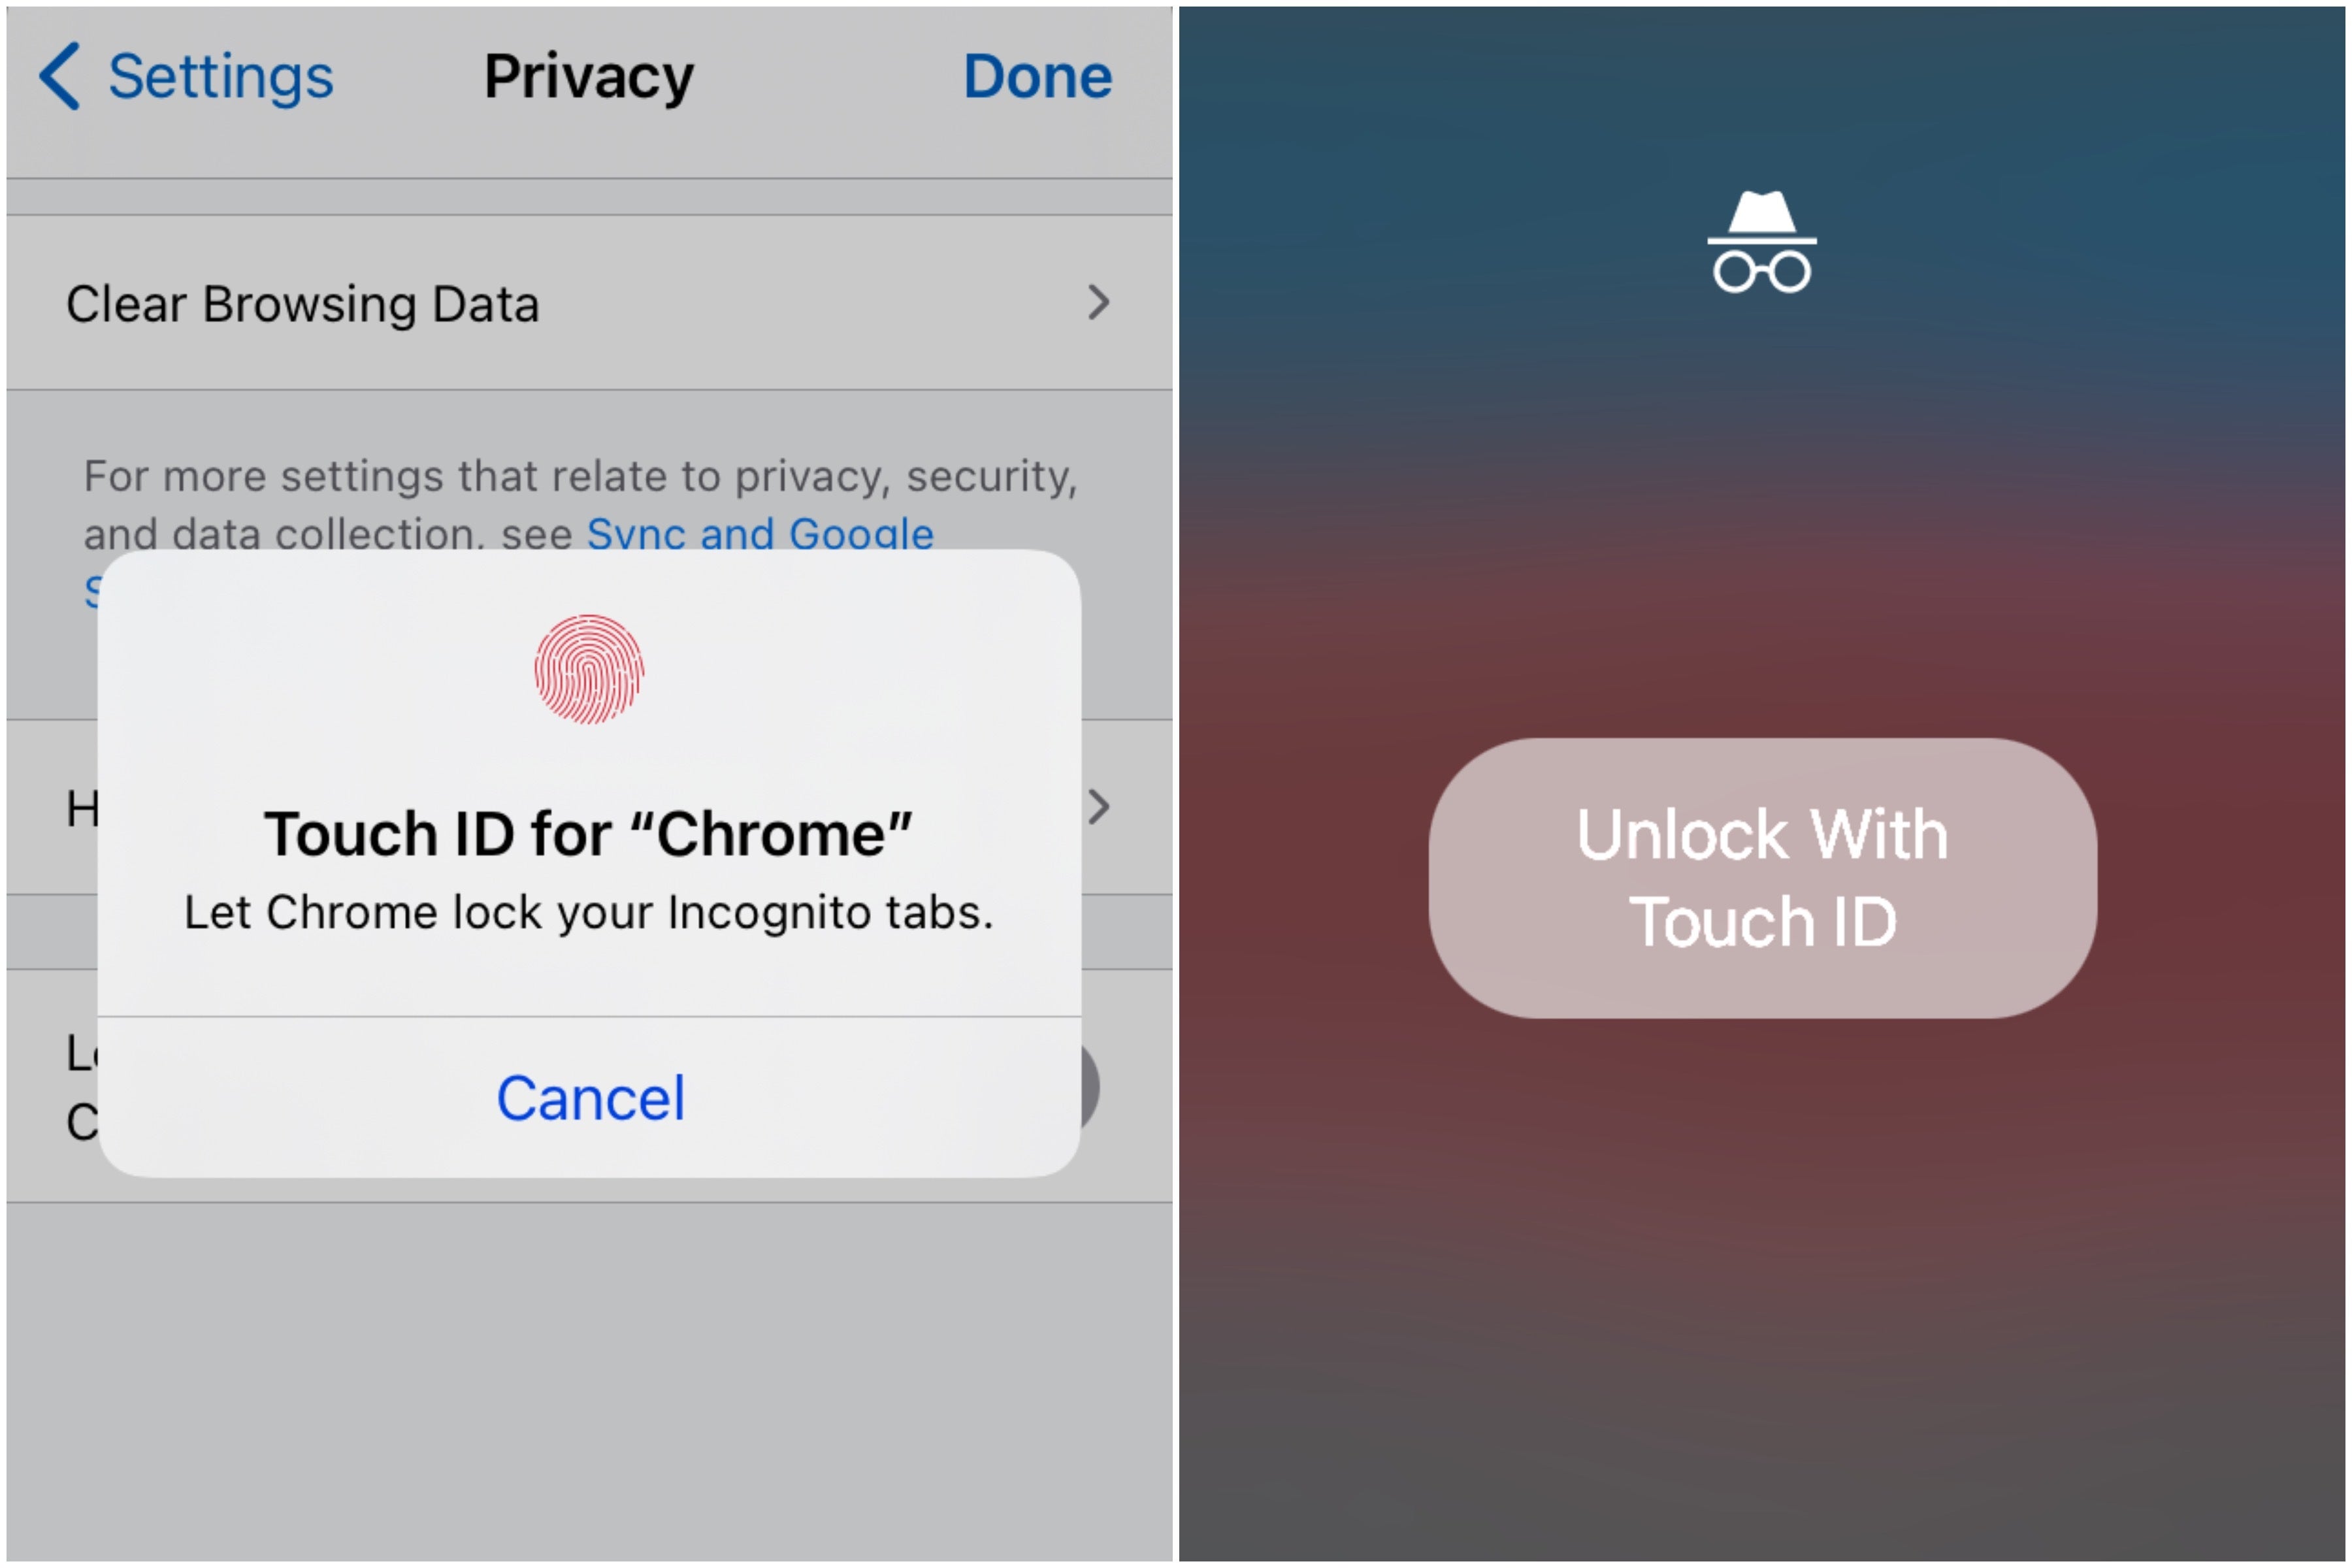 Face ID & Touch ID can now unlock your incognito tabs on Chrome for iOS